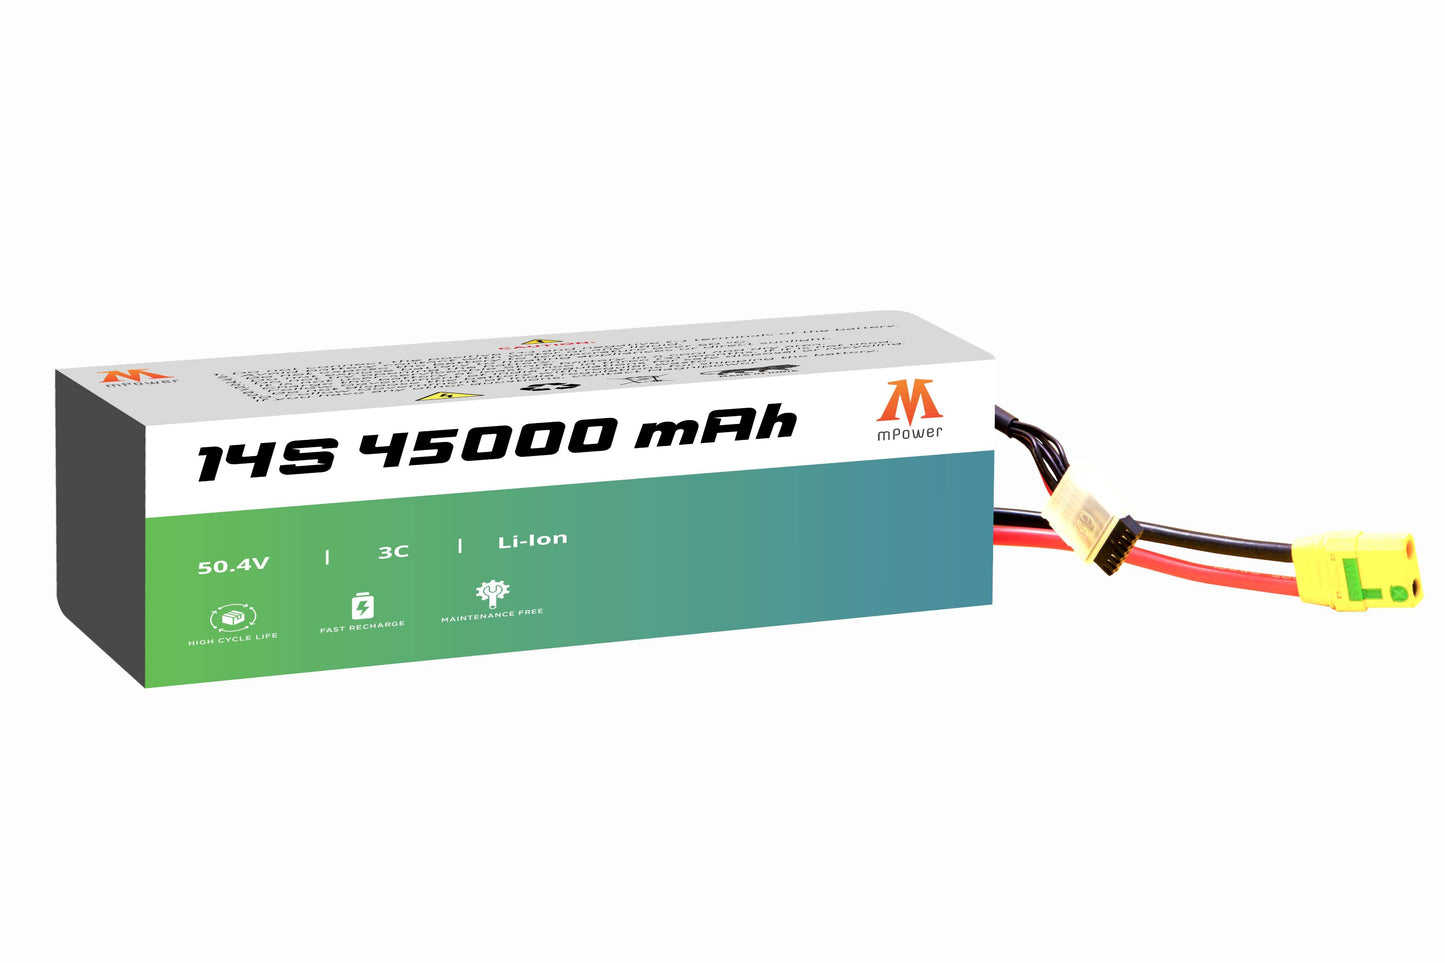 mPower 14S 45000mAh Lithium-Ion Battery for Delivery Drones